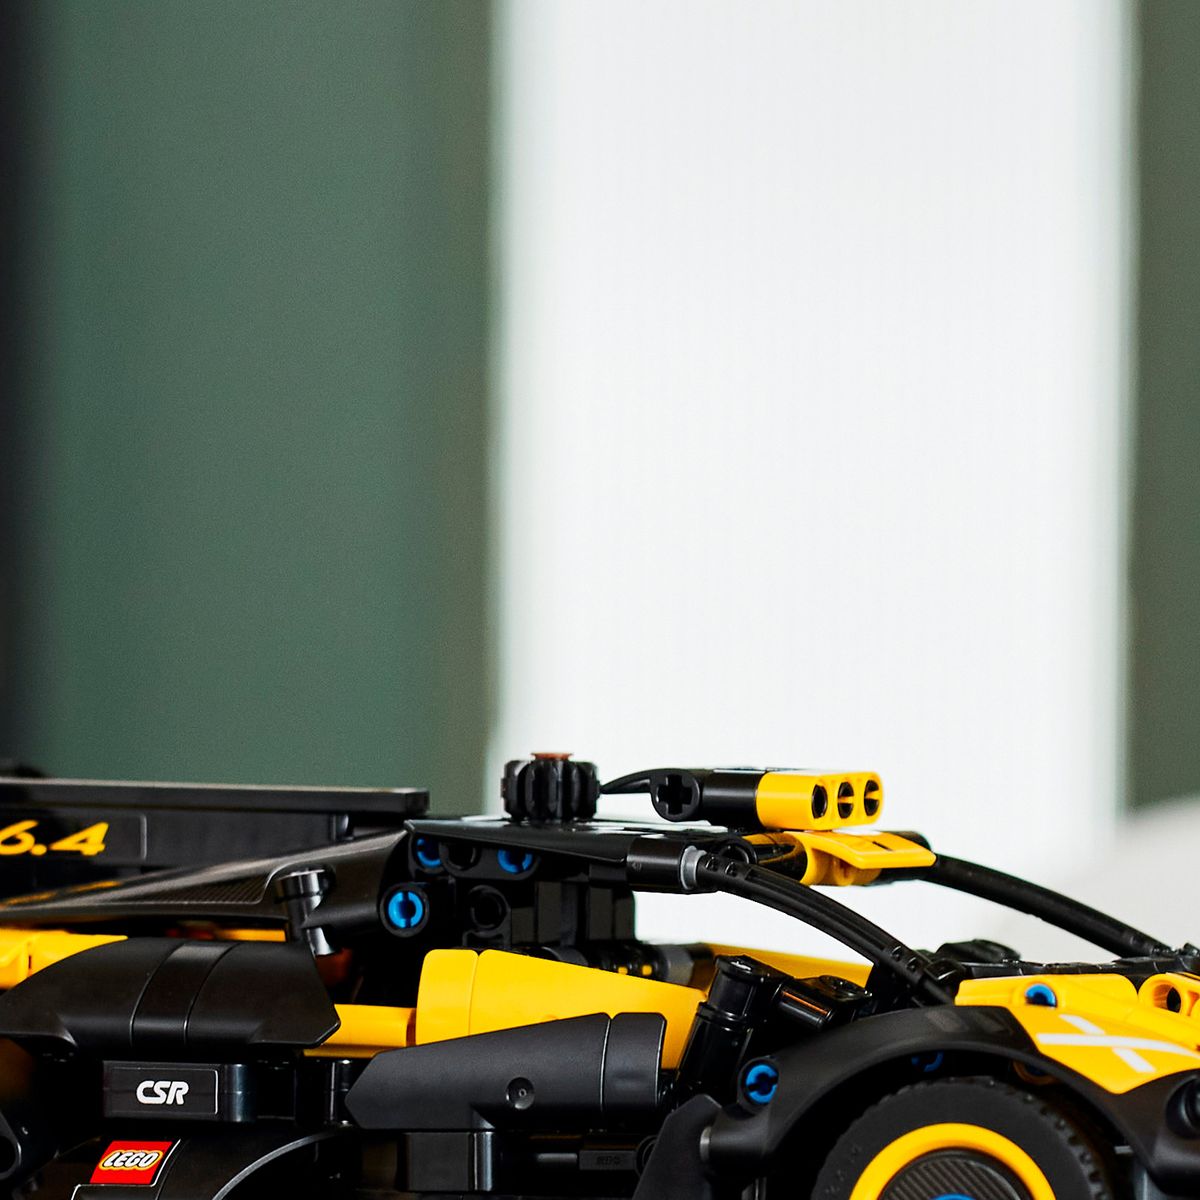 affjedring Eastern Perpetual Lego Technic Bugatti Bolide Is a Supercar You Can Build at Home